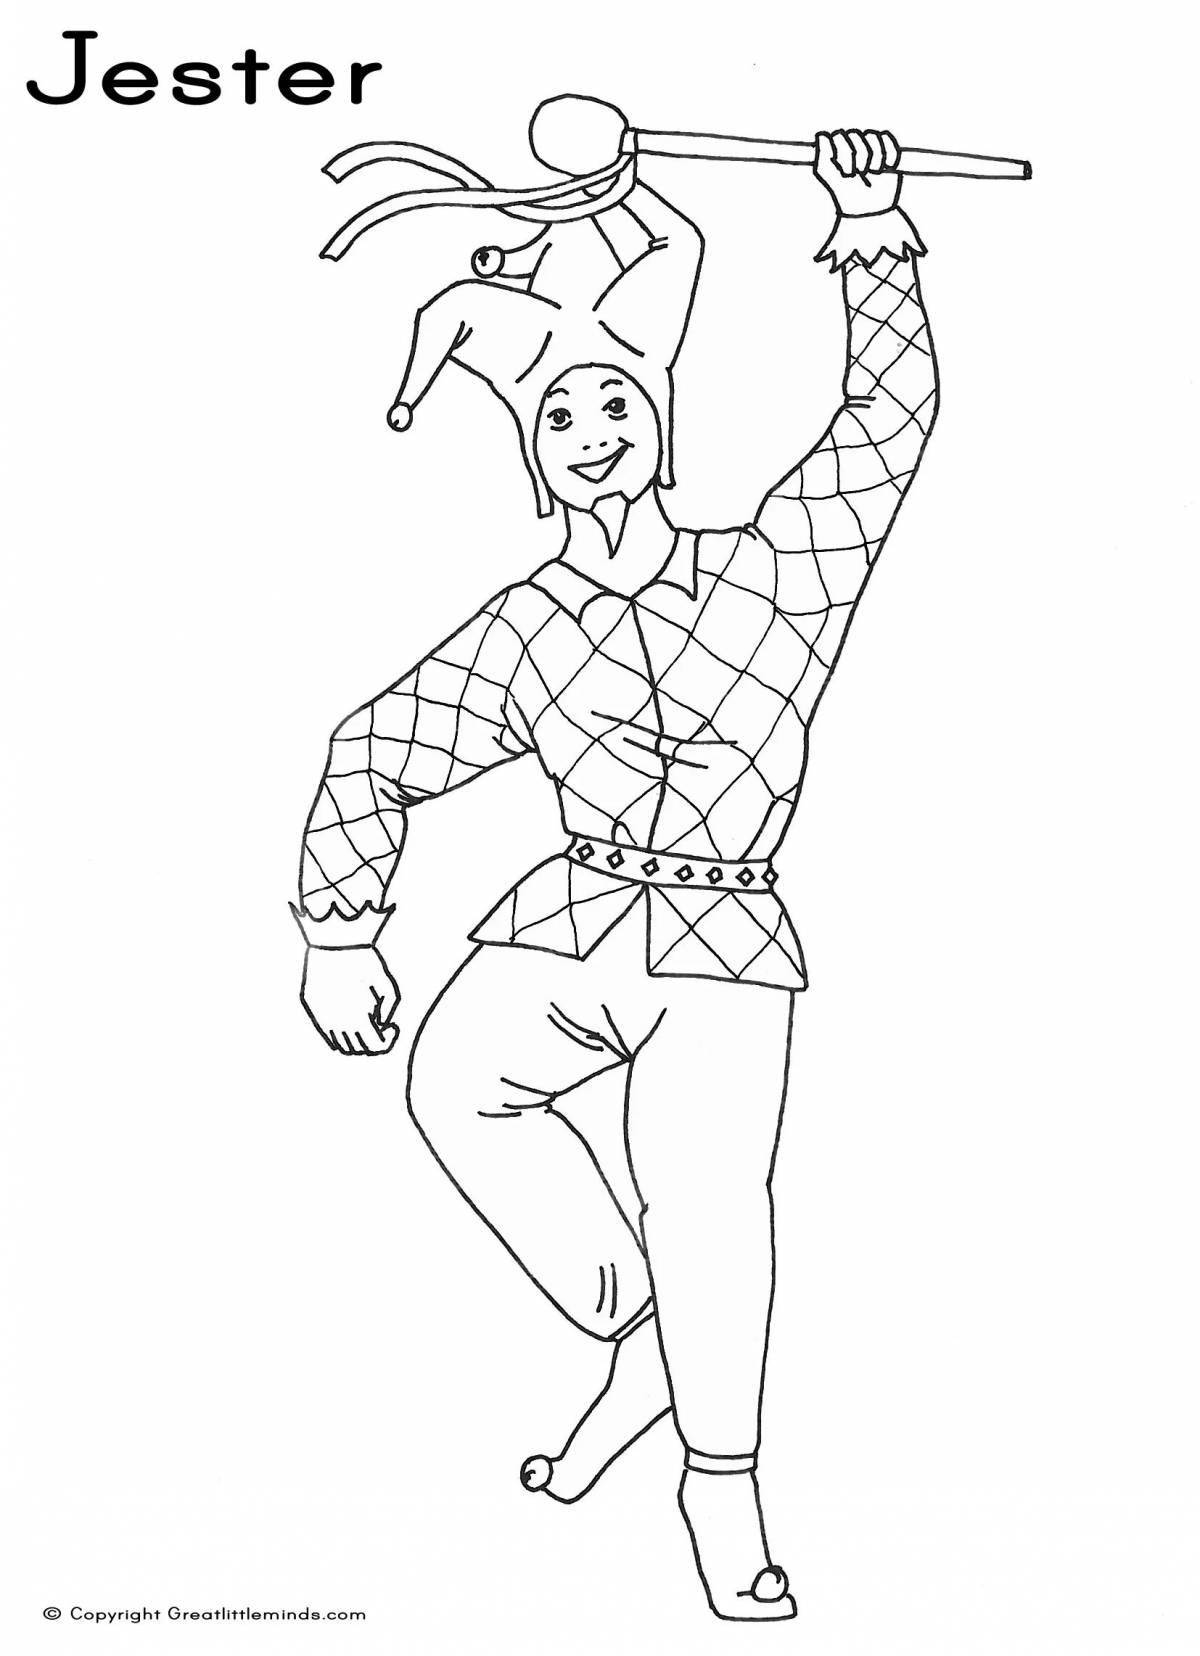 Charming jester coloring page